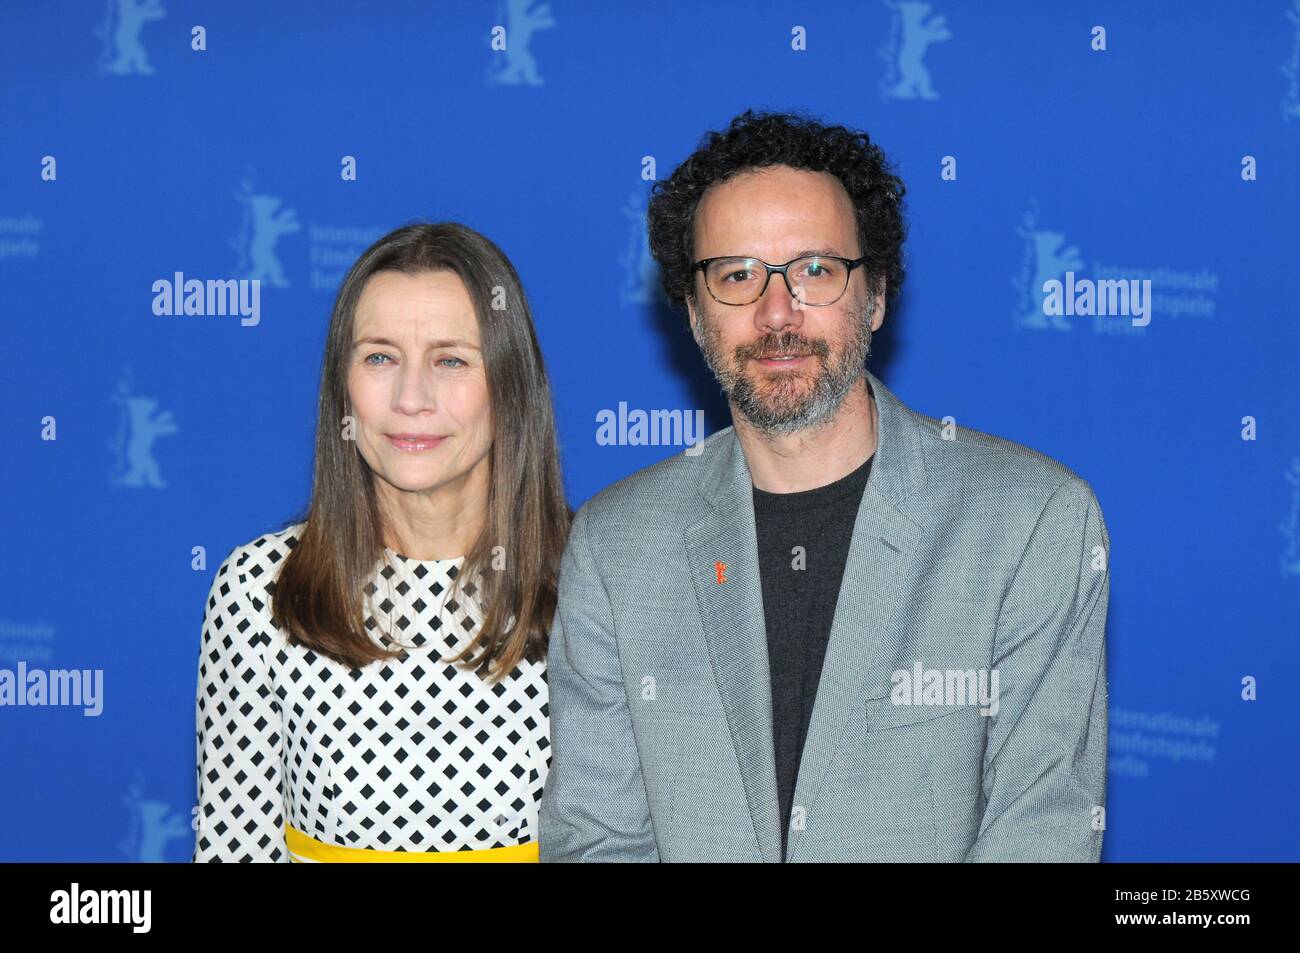 February 23rd, 2020  Festival Directors photocall and press conference during the Berlinale Film Festival 2020. Stock Photo